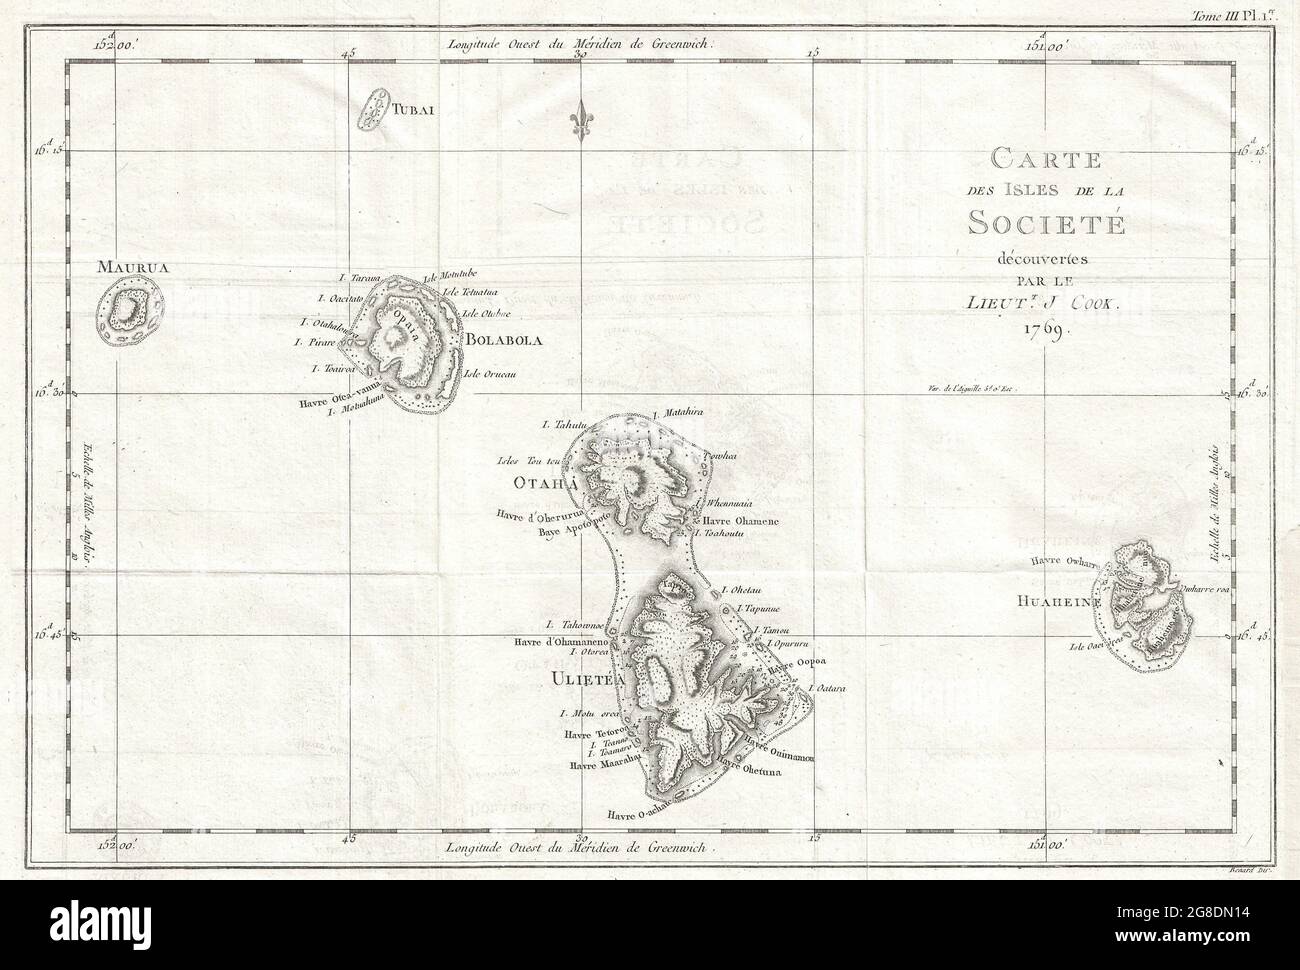 map of the Society Islands, composed by James Cook on his first voyage. Consists of the islands of Maurua, Tubai, Bolabola, Otaha, Ulietéa and Huaheine. This group was identified by Cook in 1769, when he wrote in his journal, 'So call'd by the Natives and it was not thought advisable to give them any other names but these three together with Huaheine, Tubai, and Maurua as they lay contiguous to one another I have named Society Isles.' Offers considerable detail on each of the island, attempting to show reefs, mountains, valley, topographical features and, occasionally, depth soundings. Stock Photo